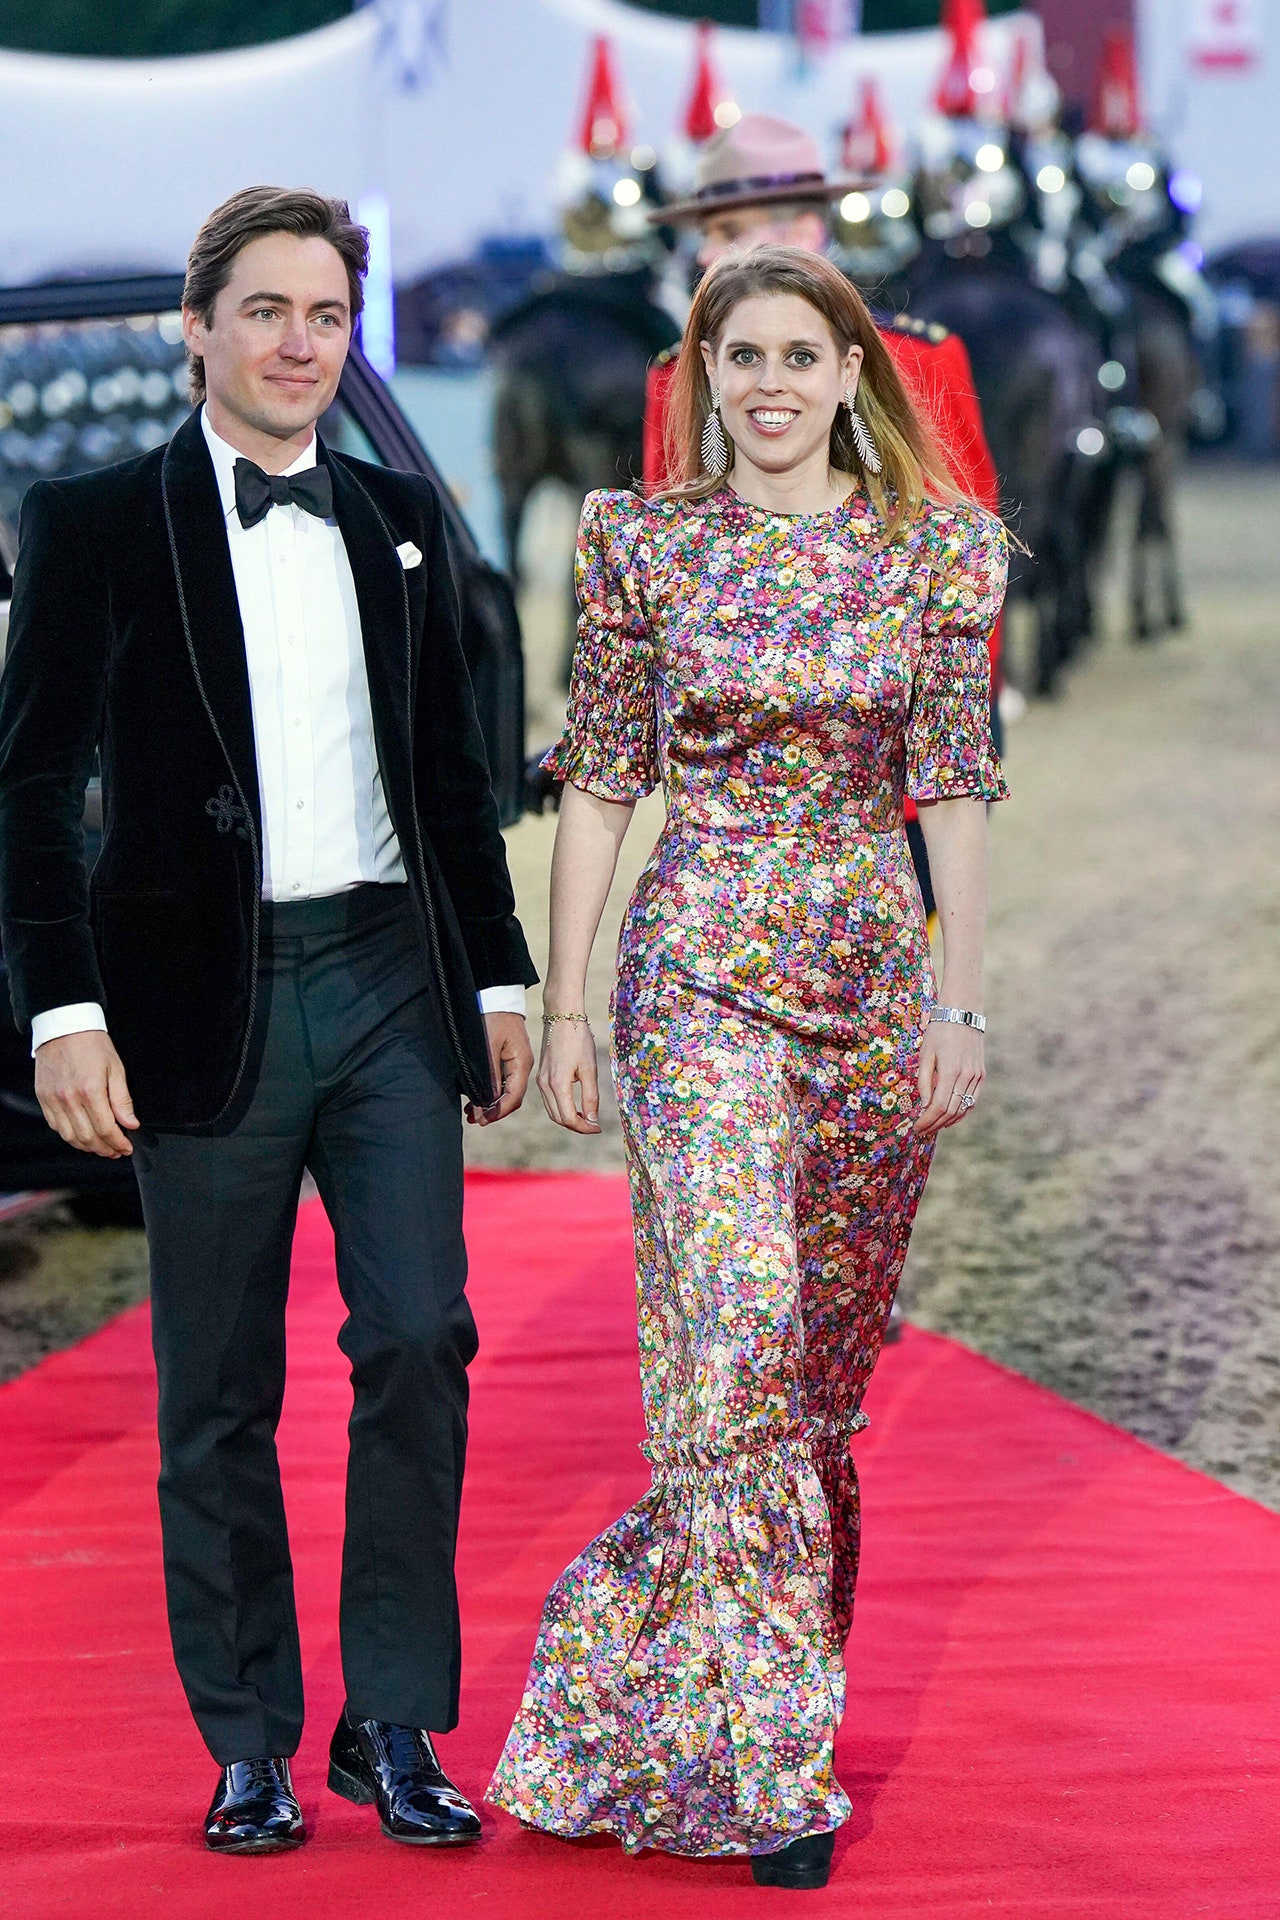 is-princess-beatrice-the-new-style-star-of-the-royal-family?